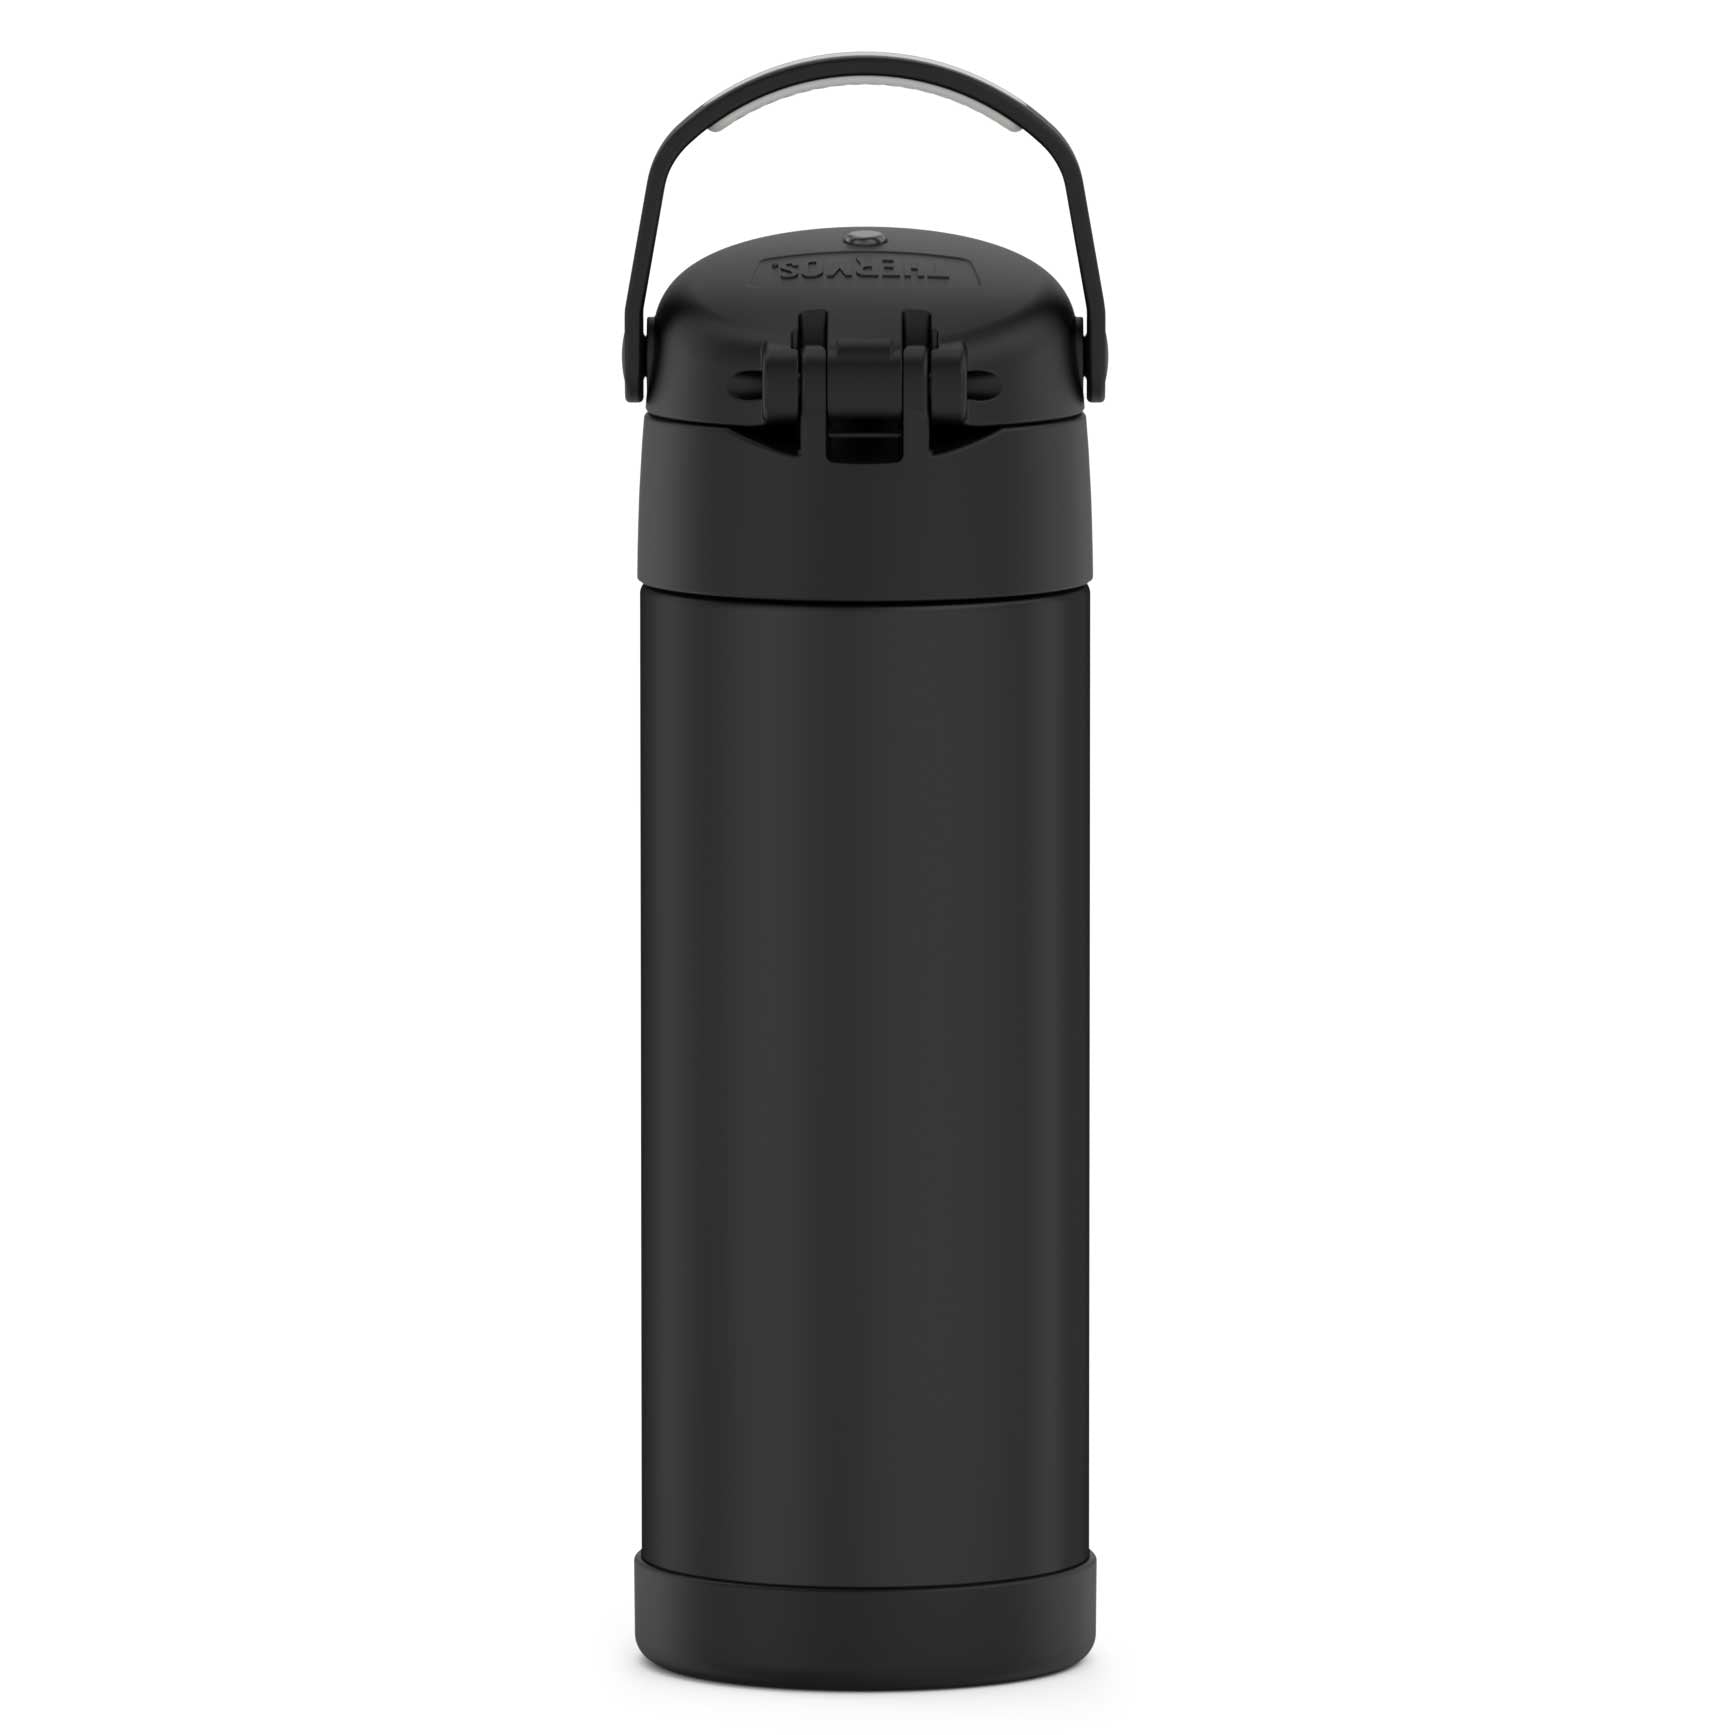 Hot Cocoa Thermos-THER- 5